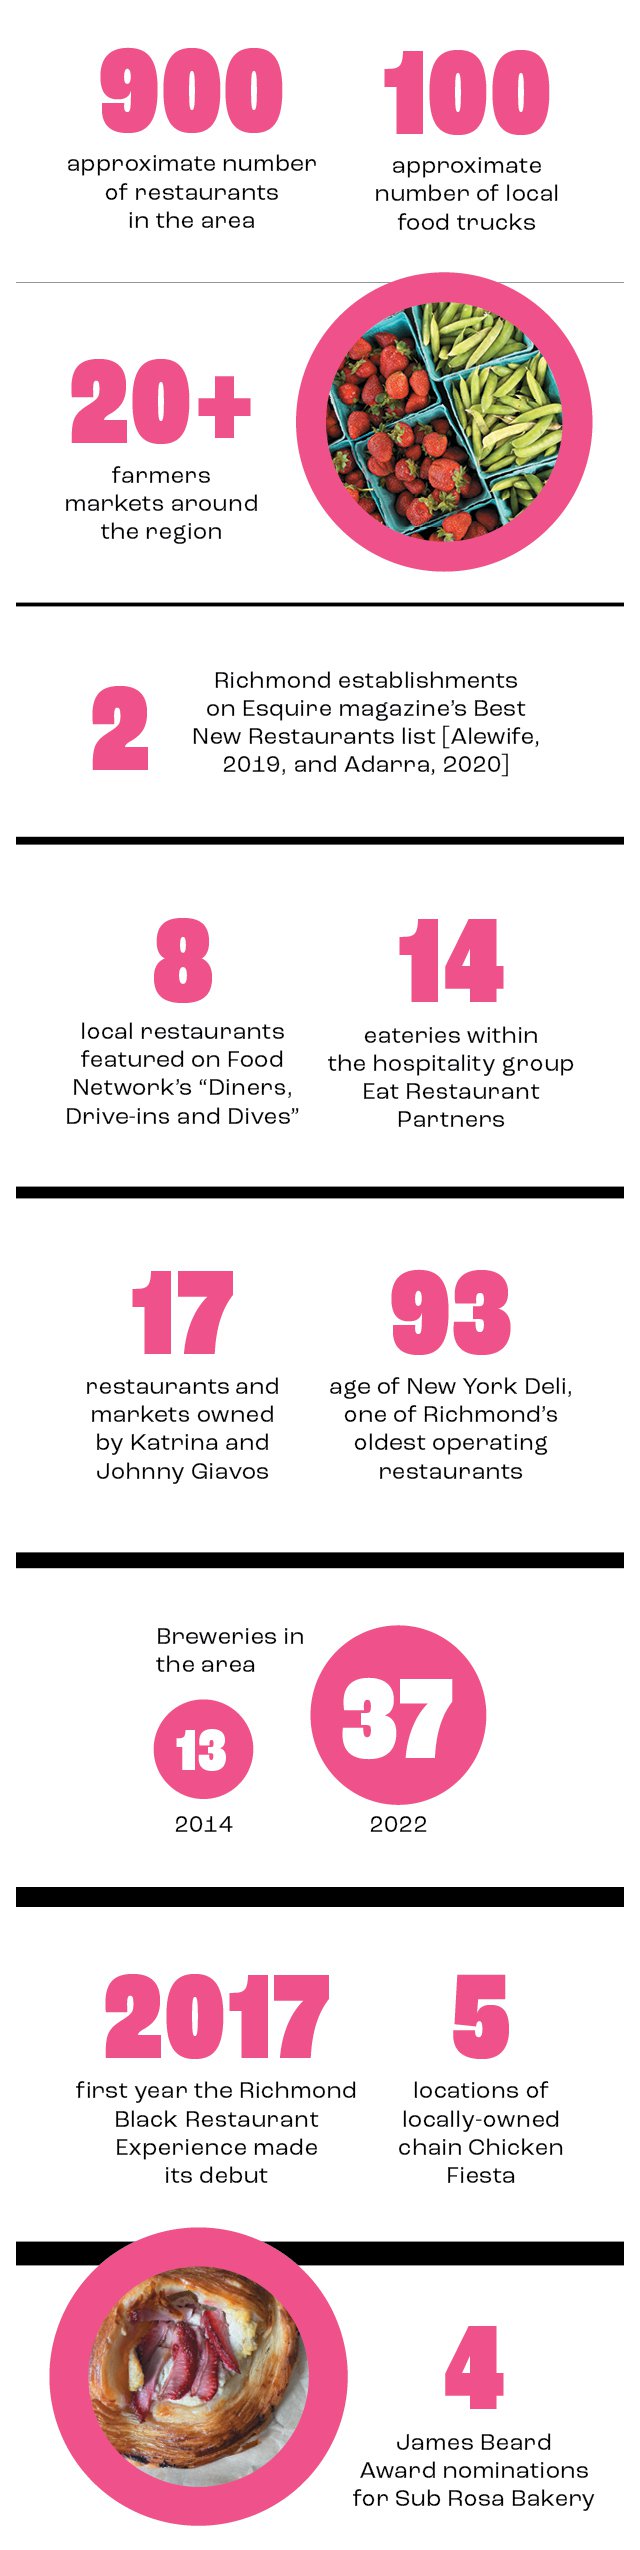 Dining_Growth_Infographic_rp0222.jpg